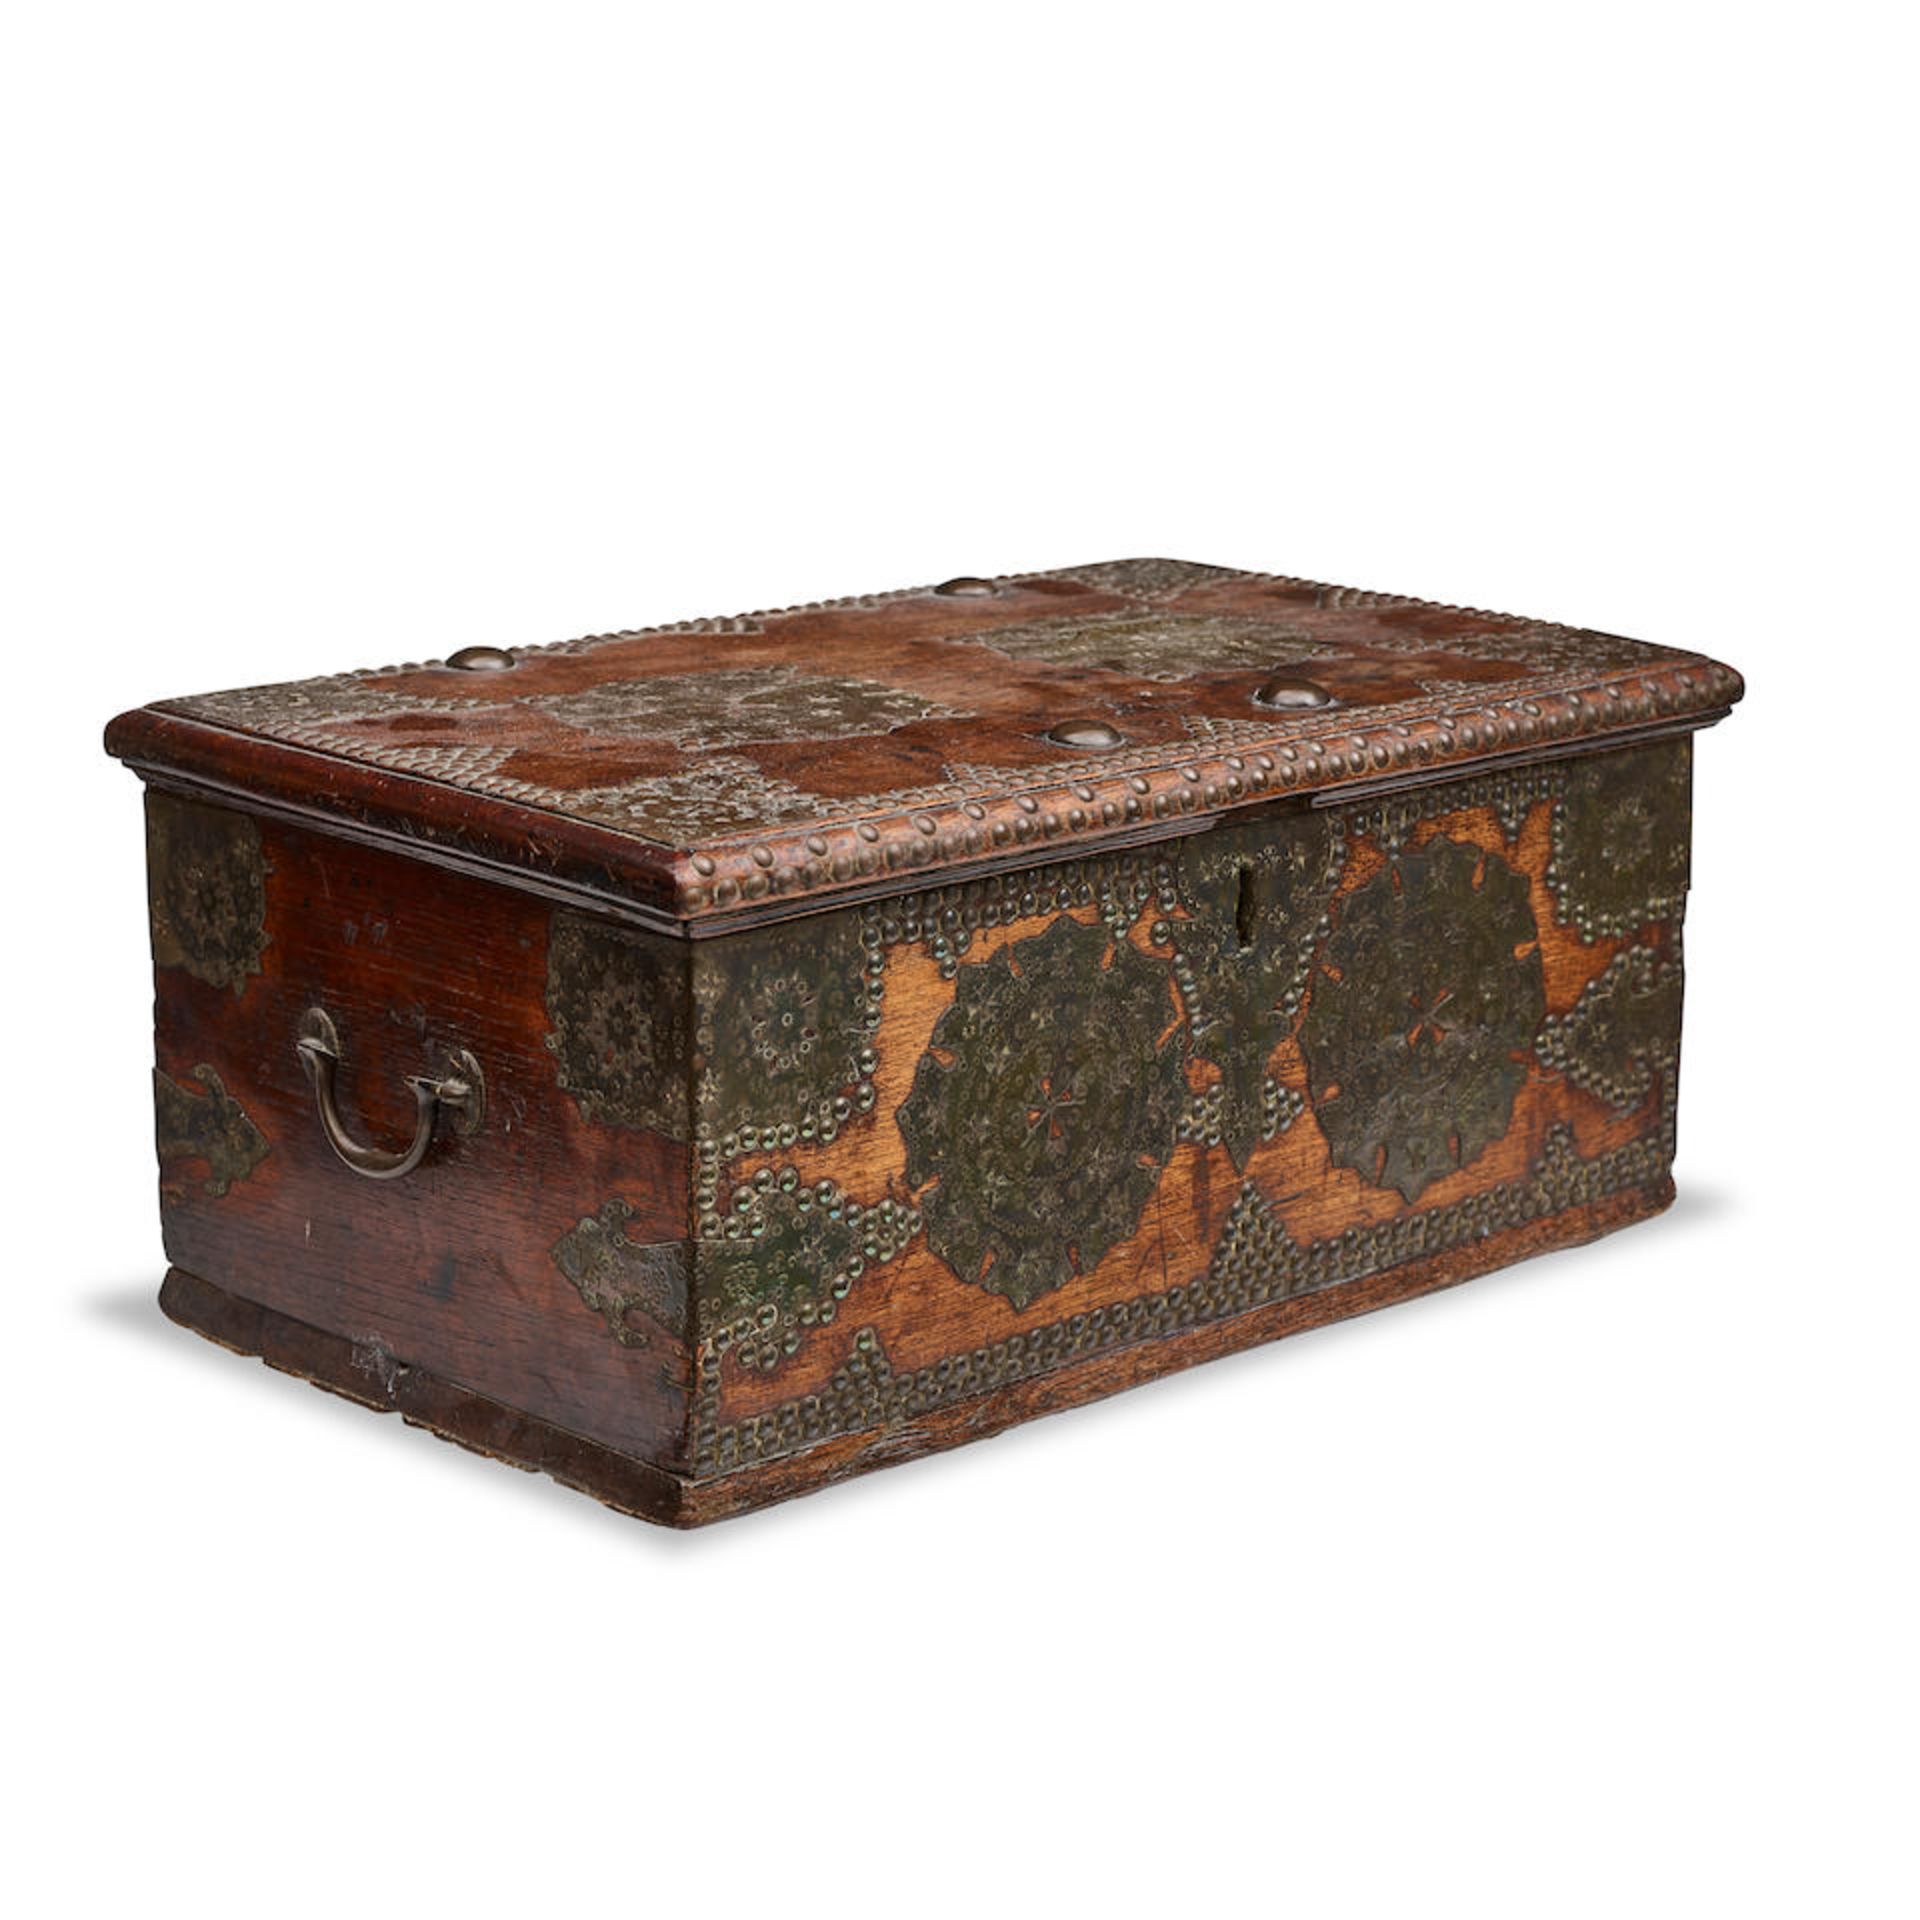 A SPANISH BRASS MOUNTED OAK CHEST18th century